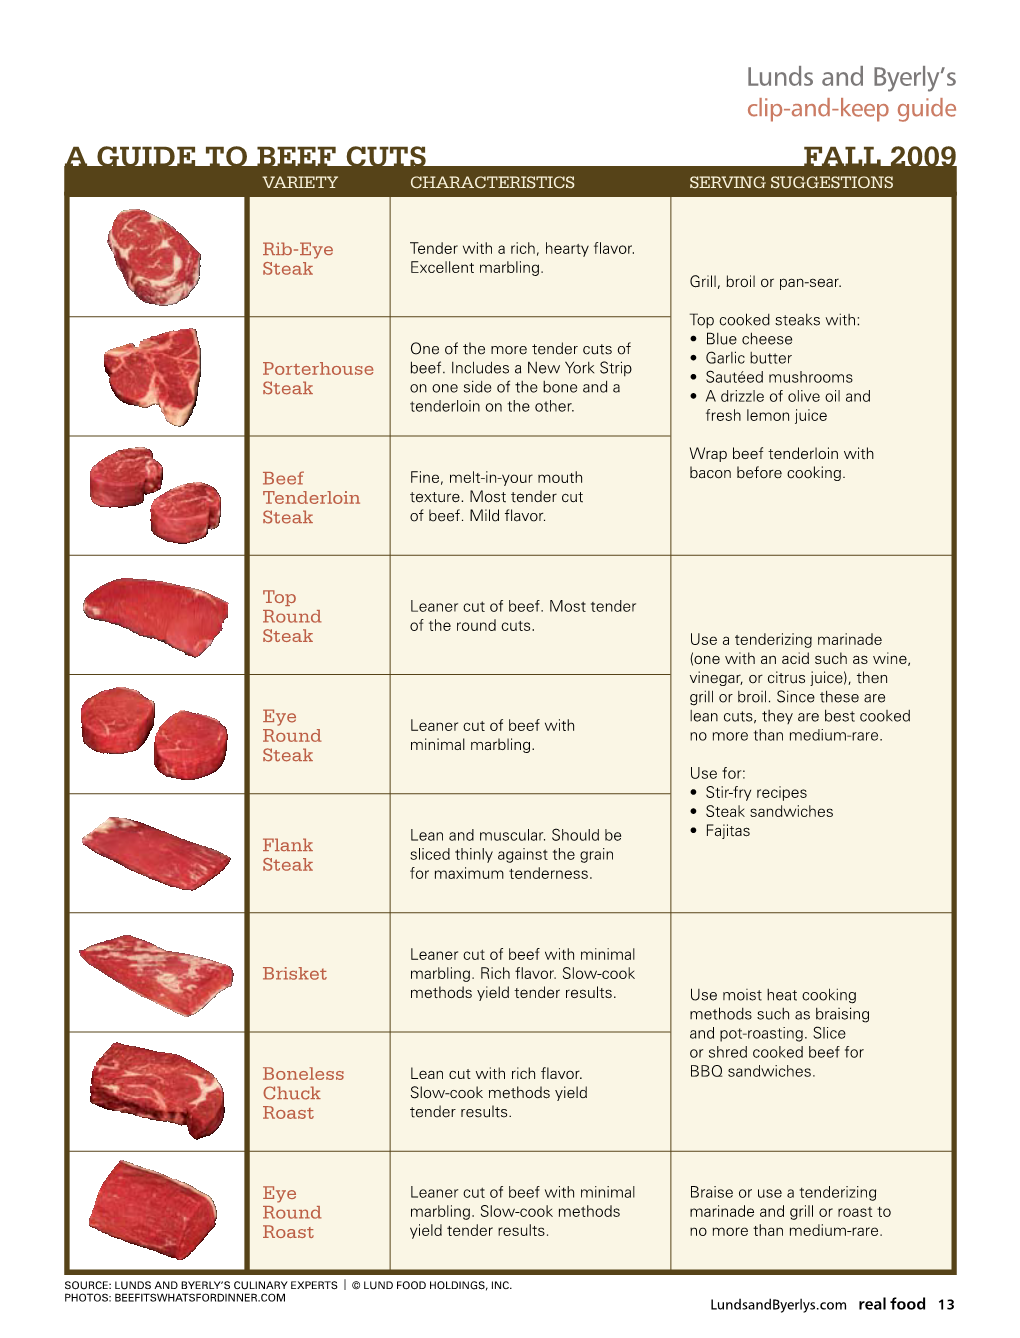 A Guide to Beef Cuts Fall 2009 Variety Characteristics Serving Suggestions